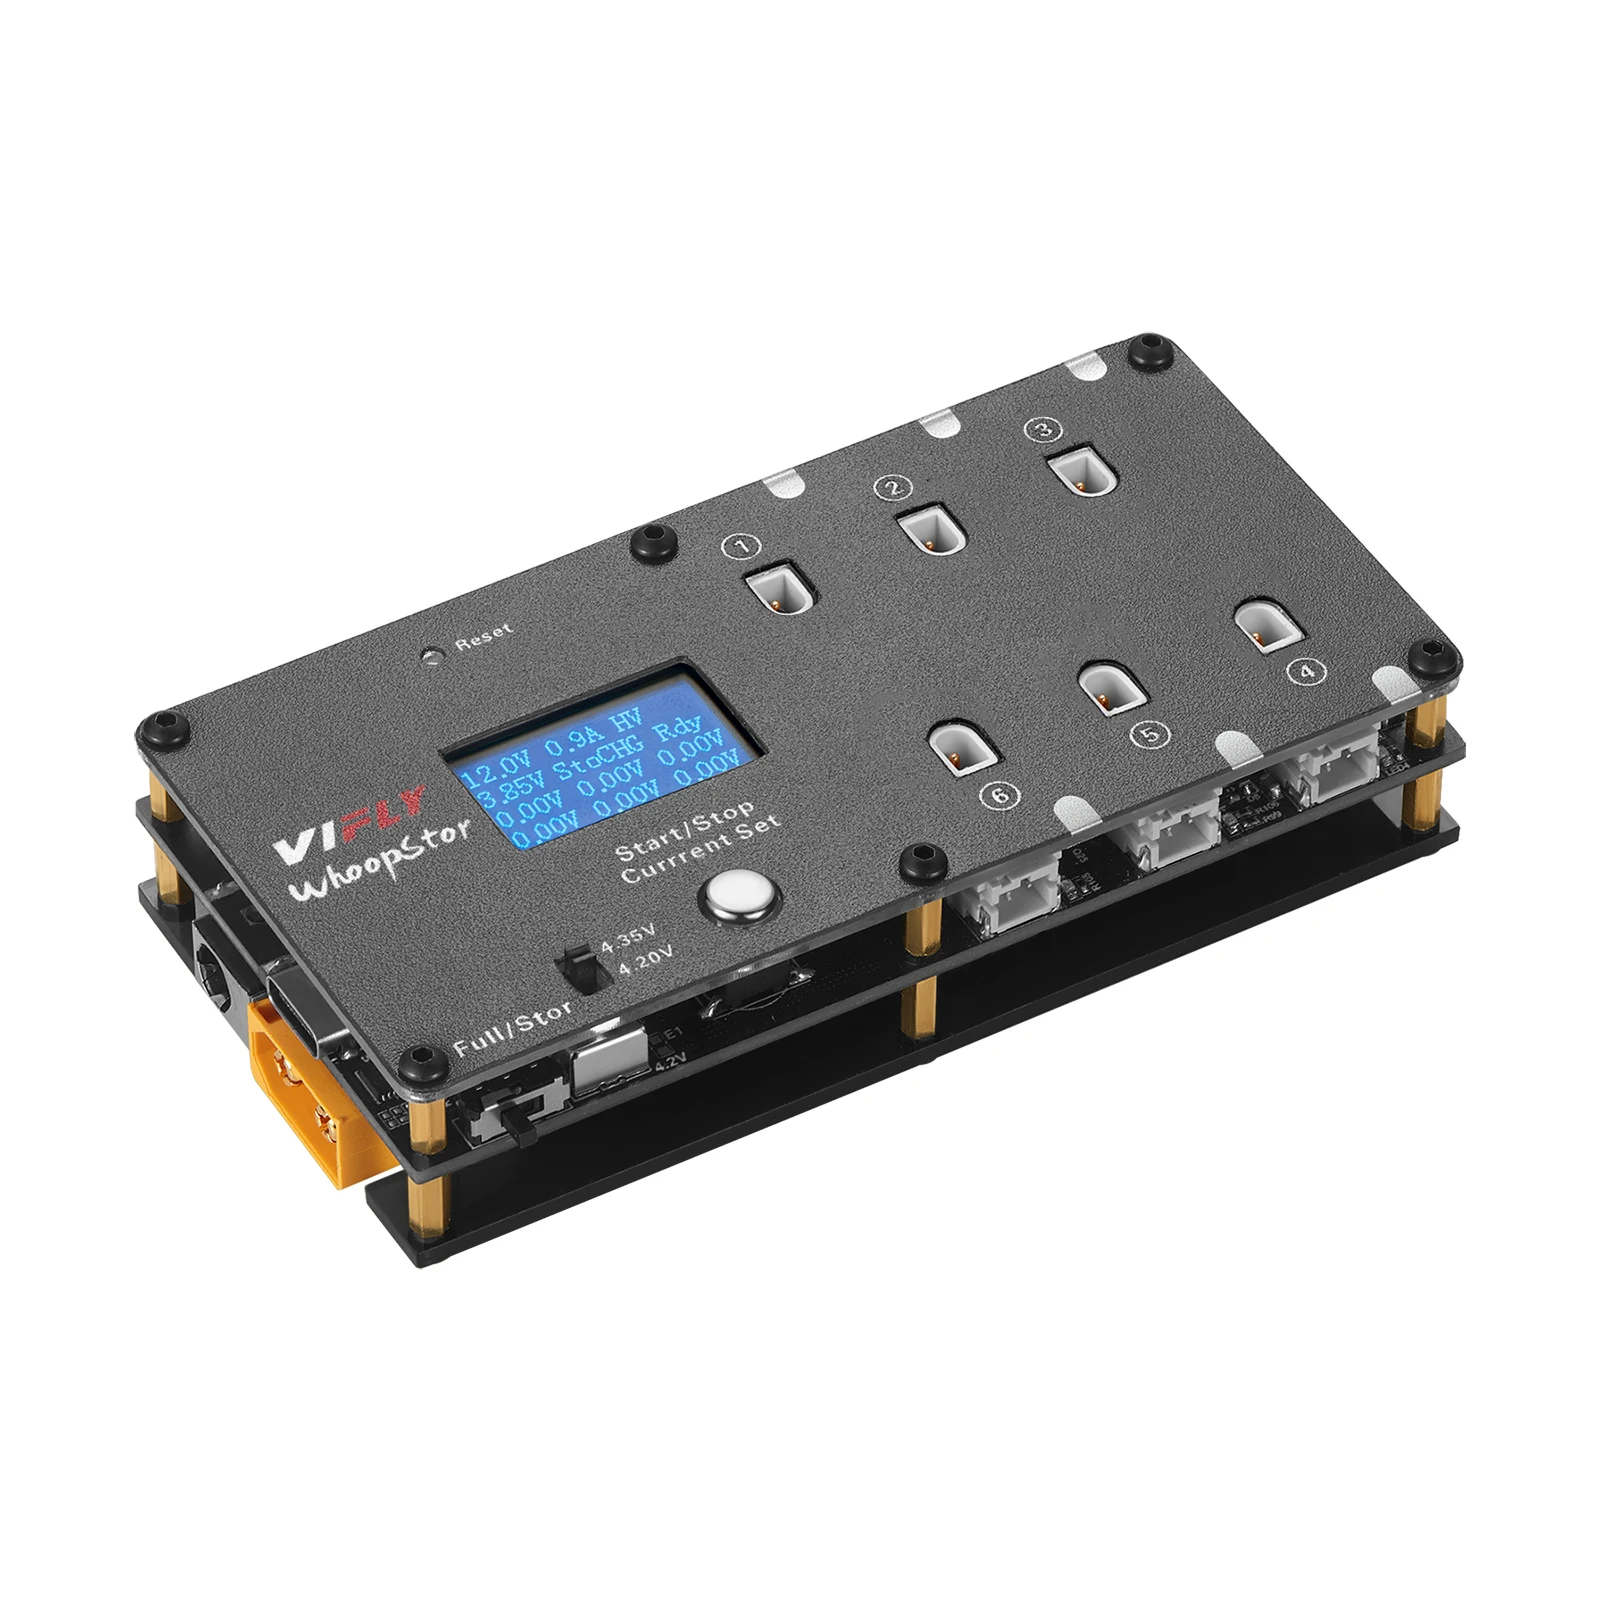 VIFLY WhoopStor V2 6 Ports 1S Battery Storage Charger Discharger